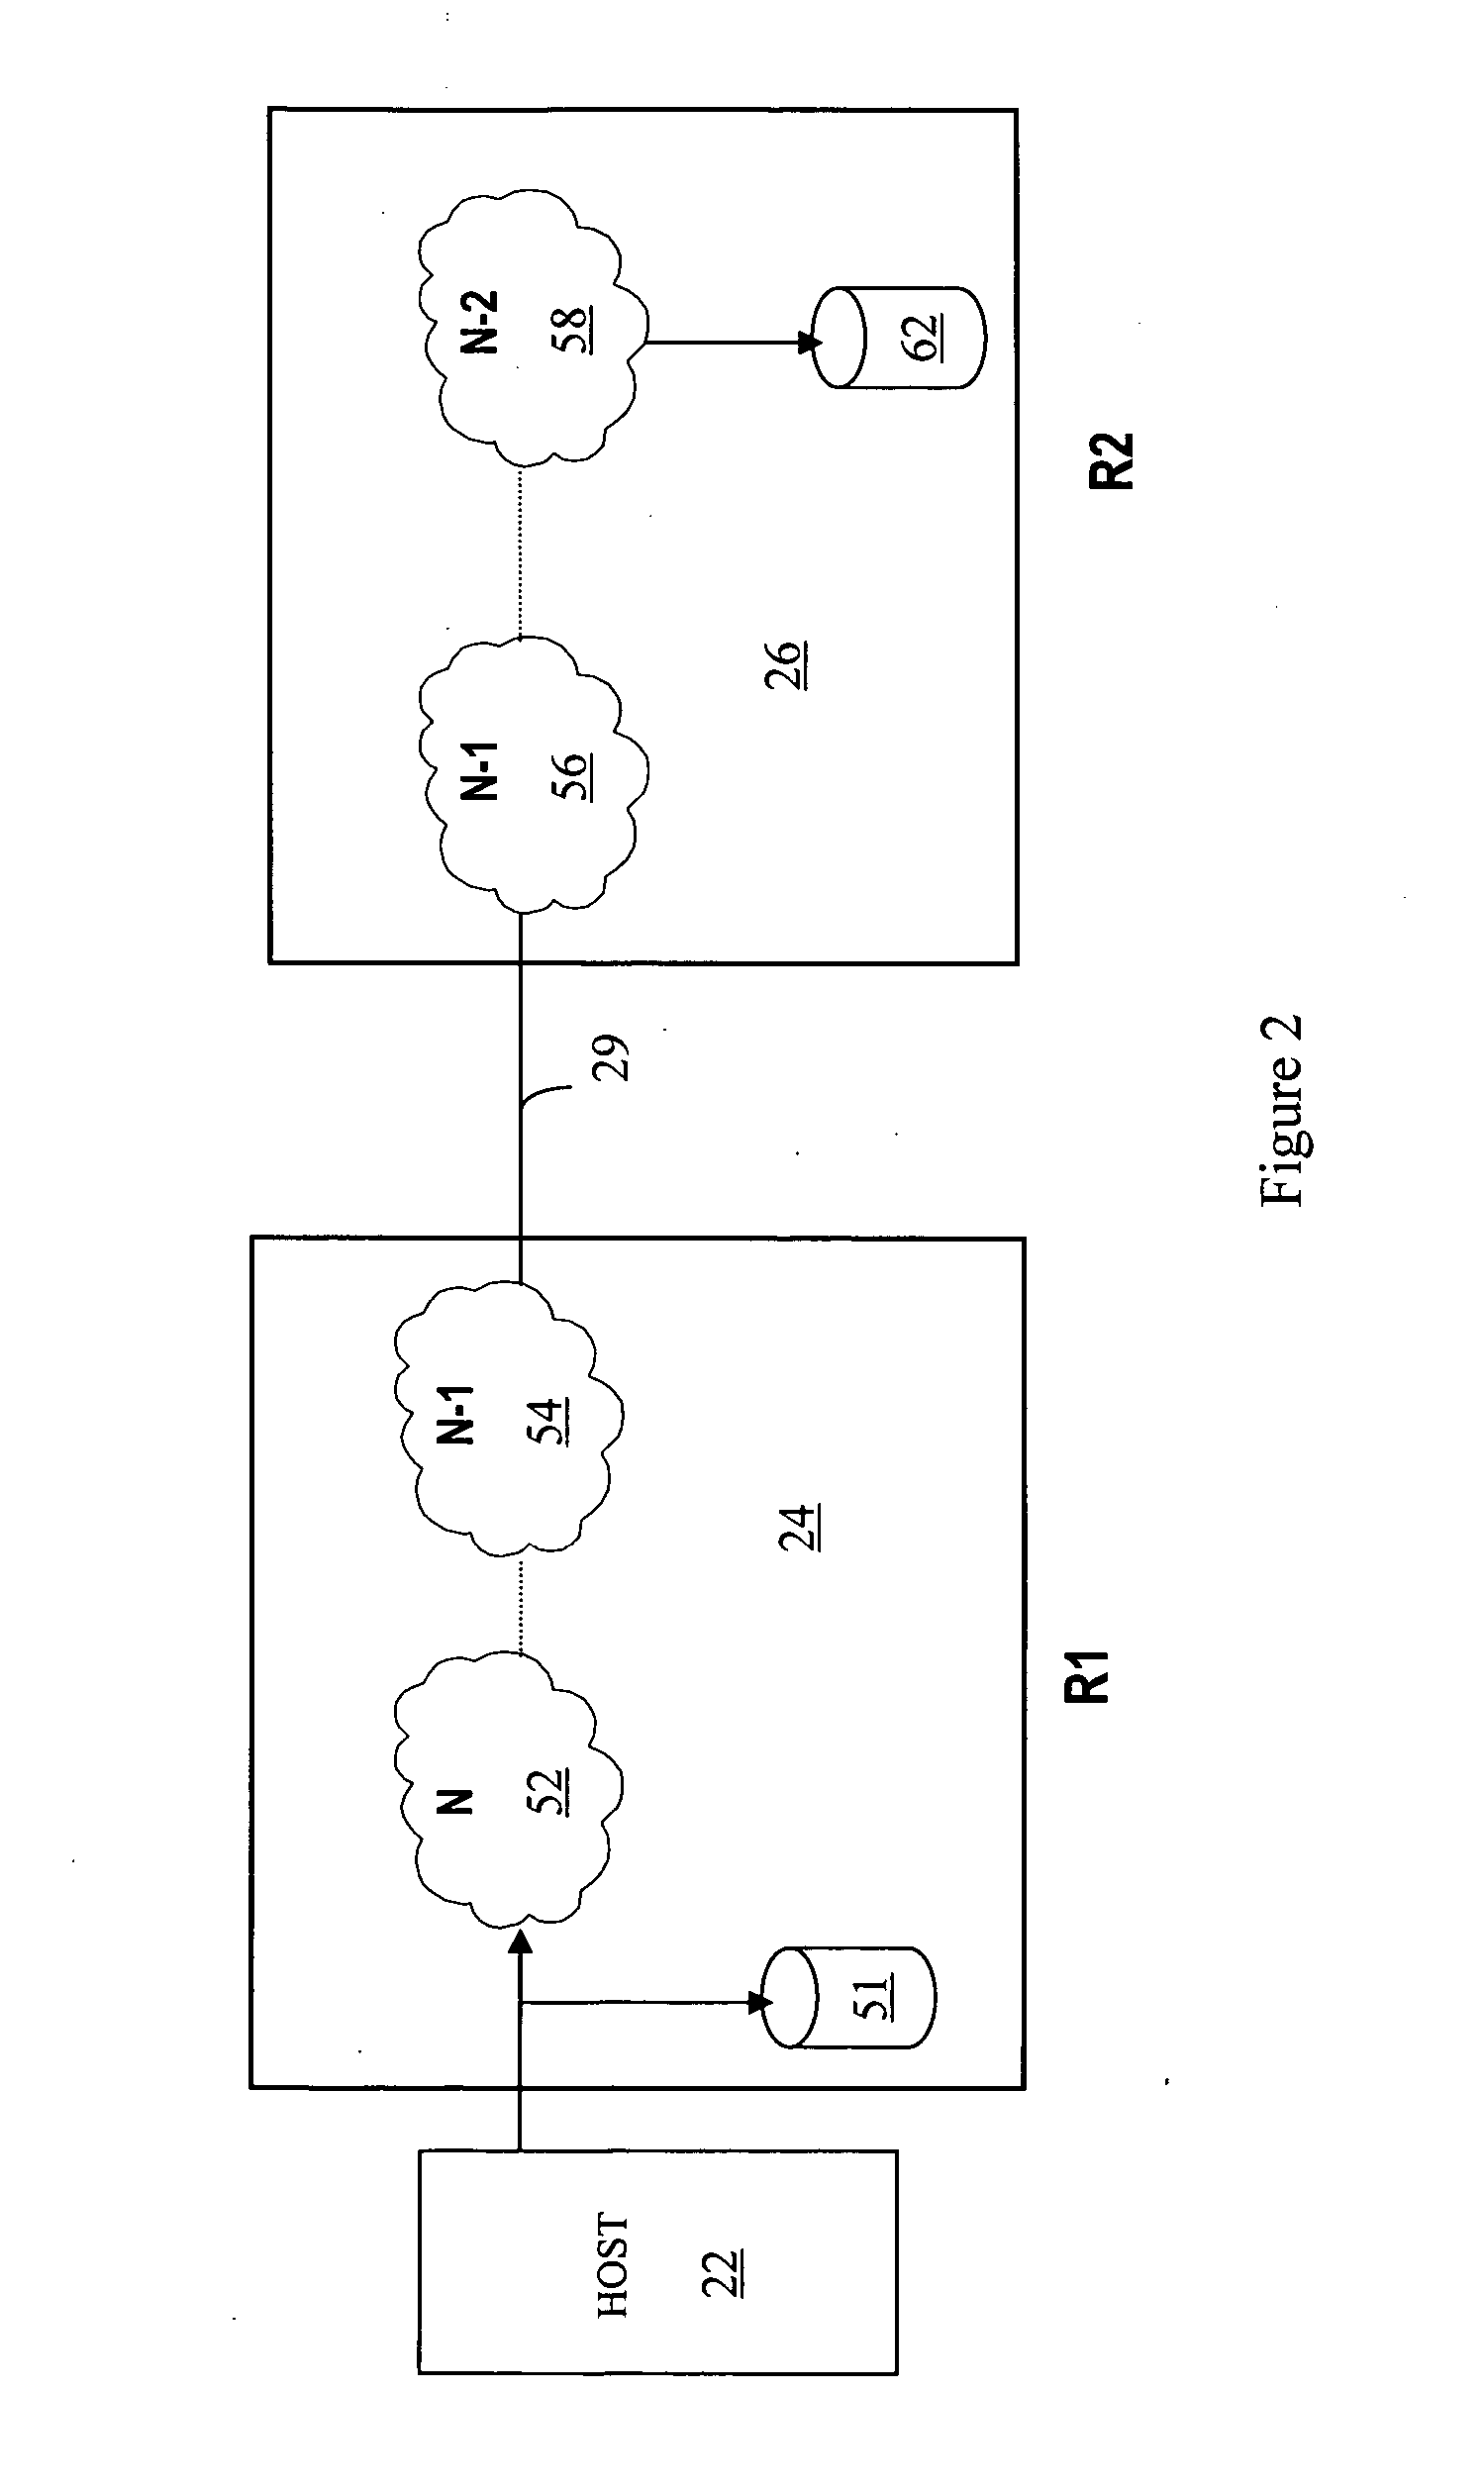 Resumption of operations following failover in connection with triangular asynchronous replication